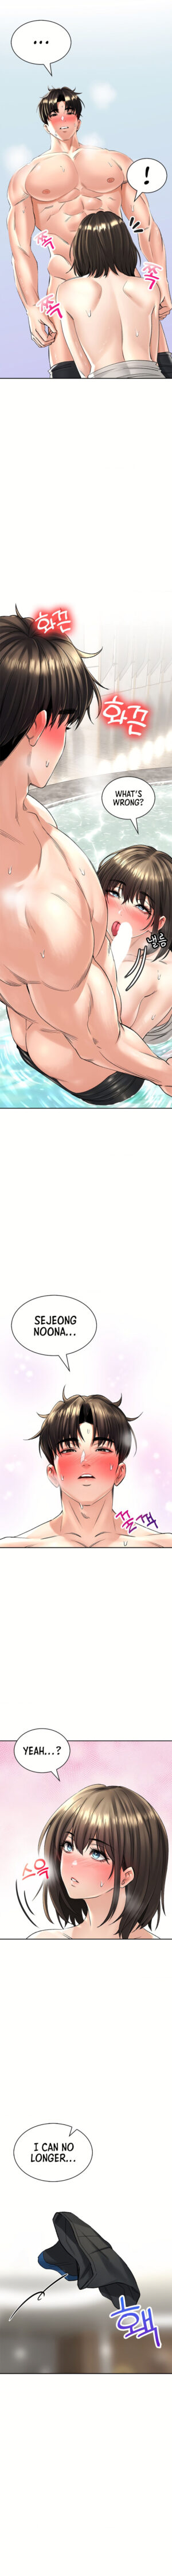 [Lee Juwon] Herbal Love Story (1-19) [English] [Omega Scans] [Ongoing]